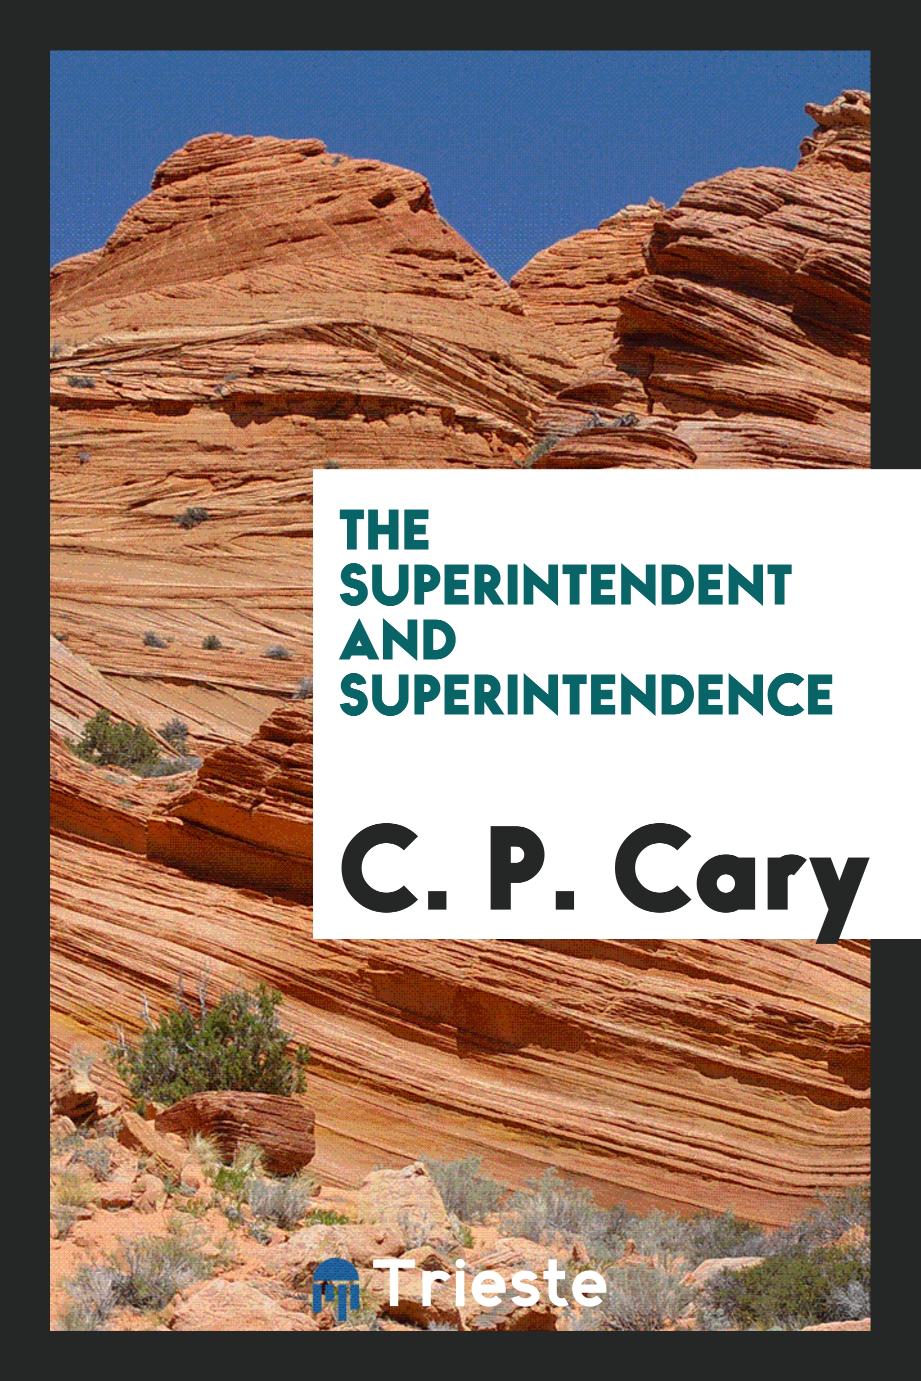 The Superintendent and Superintendence